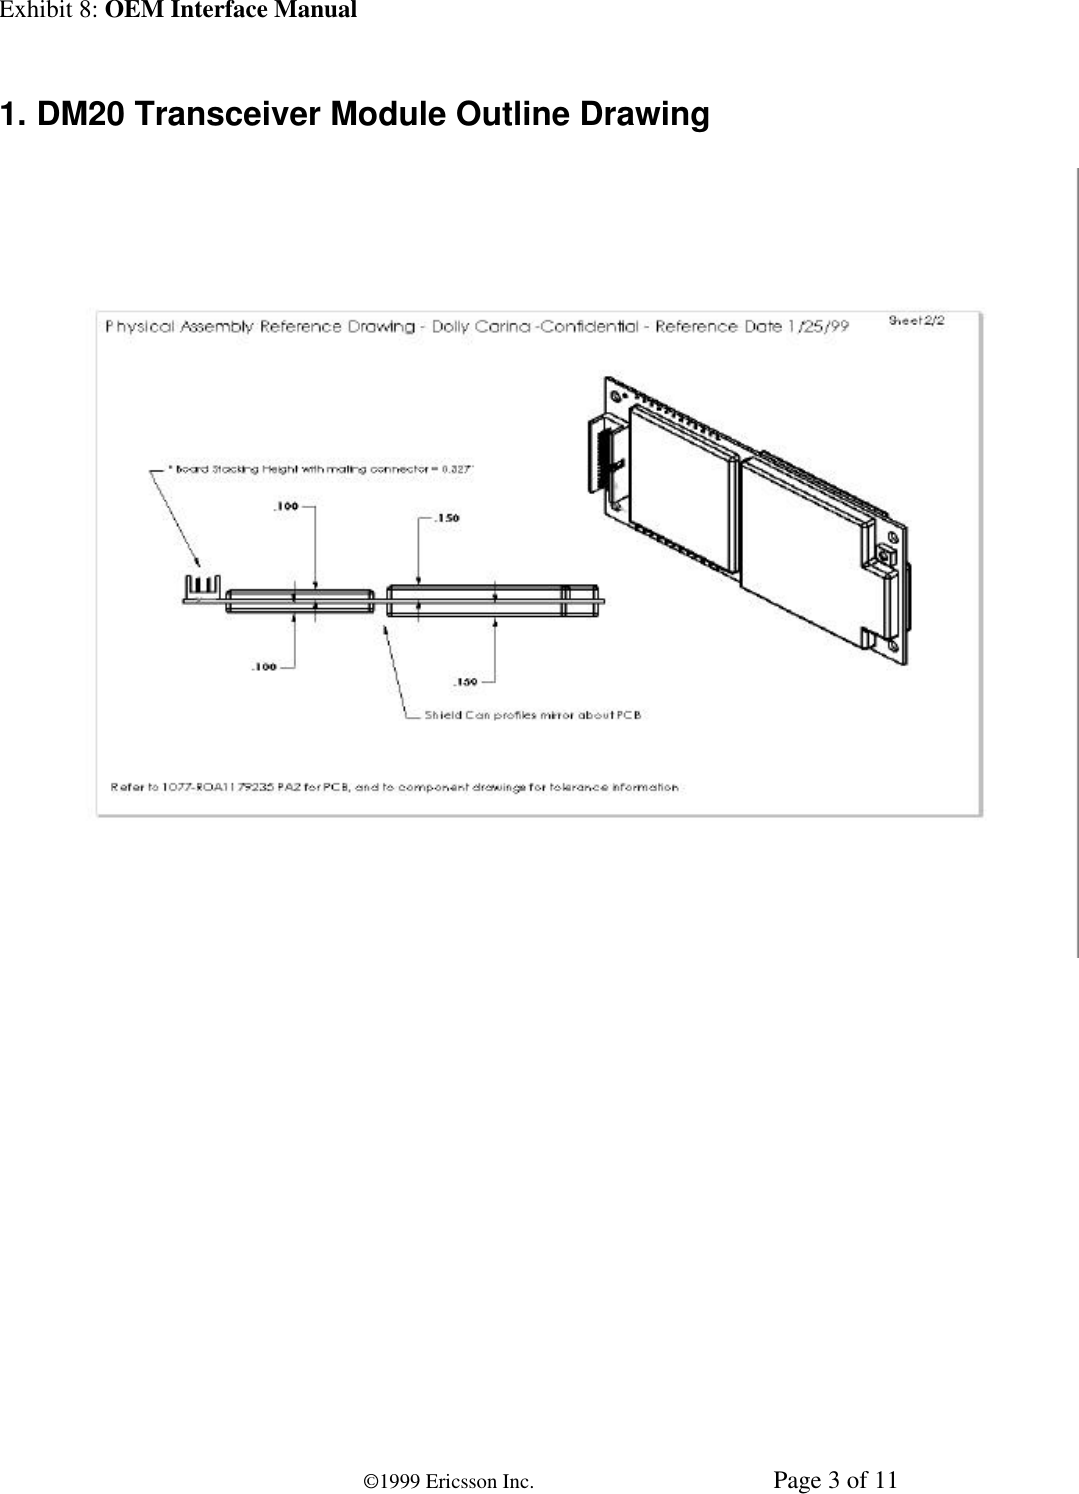 Exhibit 8: OEM Interface Manual©1999 Ericsson Inc. Page 3 of 111. DM20 Transceiver Module Outline Drawing